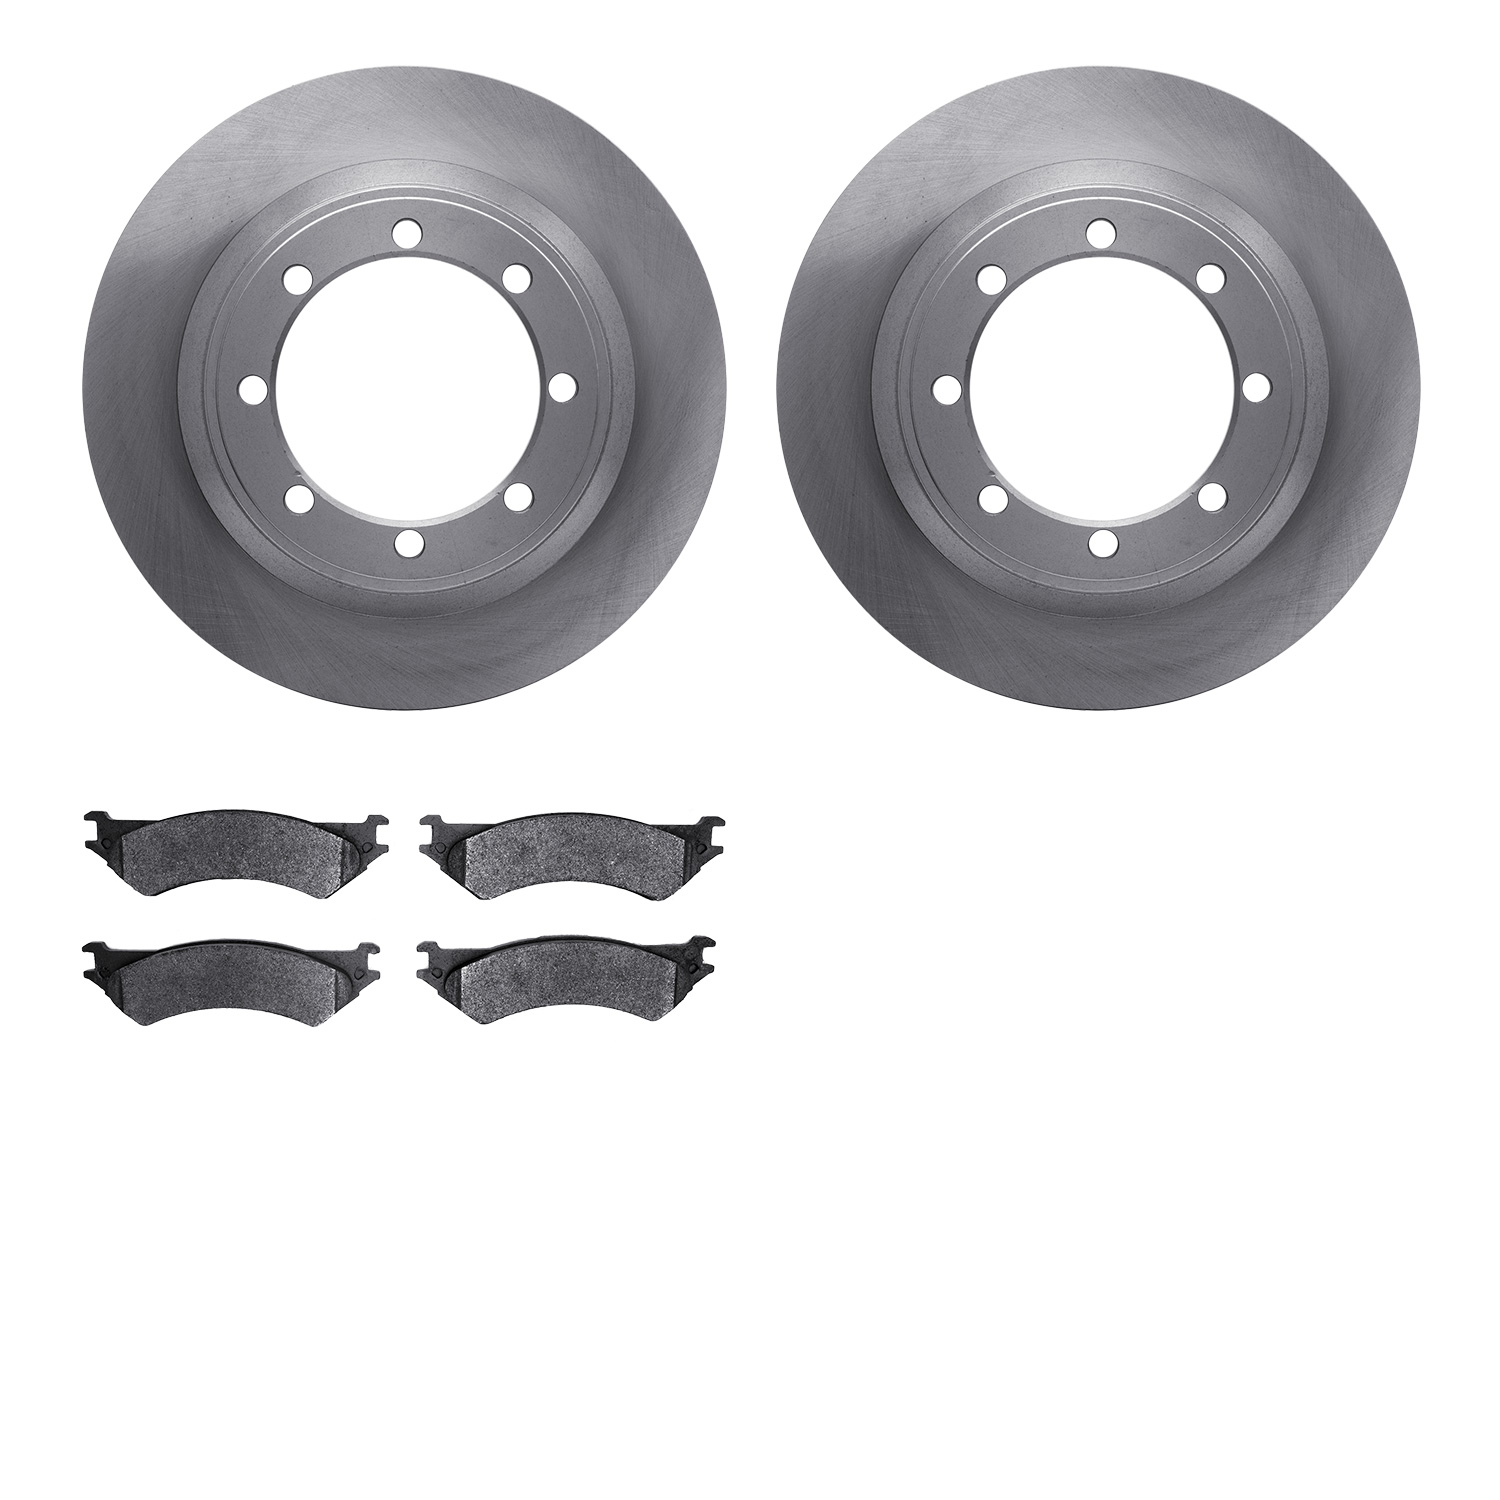 6402-54161 Brake Rotors with Ultimate-Duty Brake Pads, 1999-2007 Ford/Lincoln/Mercury/Mazda, Position: Rear